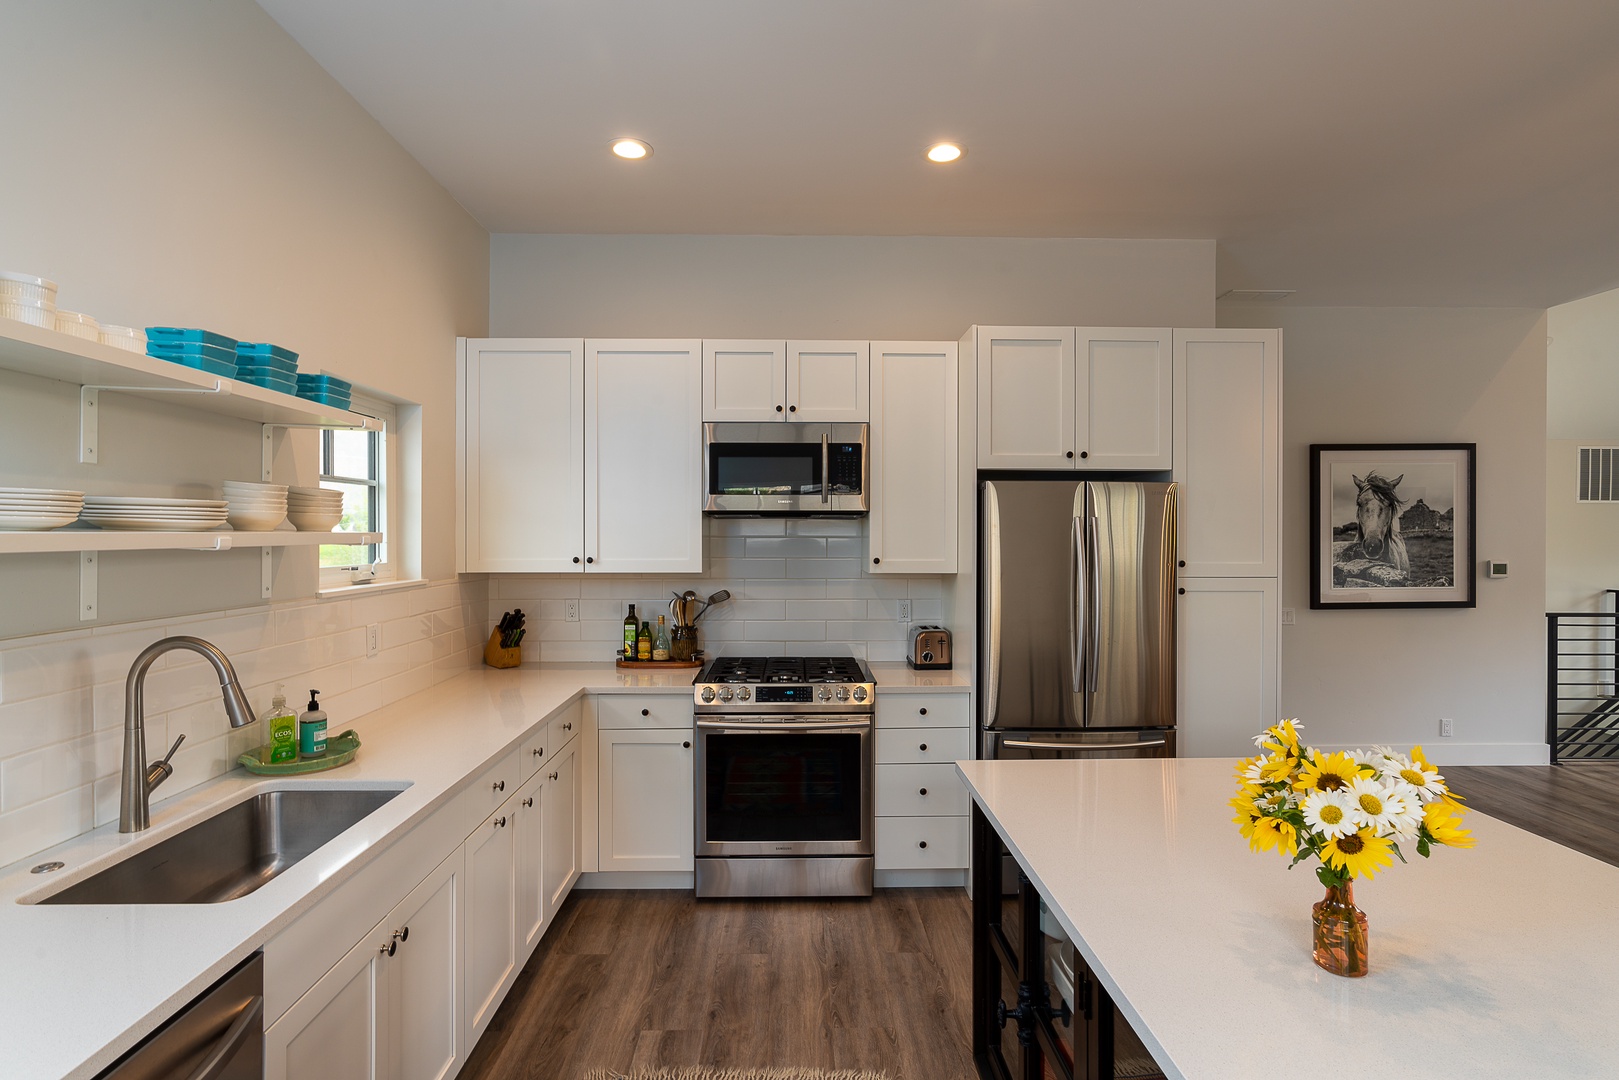 Hailey Vacation Rentals, Contemporary Red Feather Comfort - The bright and modern kitchen is fully equipped and ready for you to prepare your favorite meals